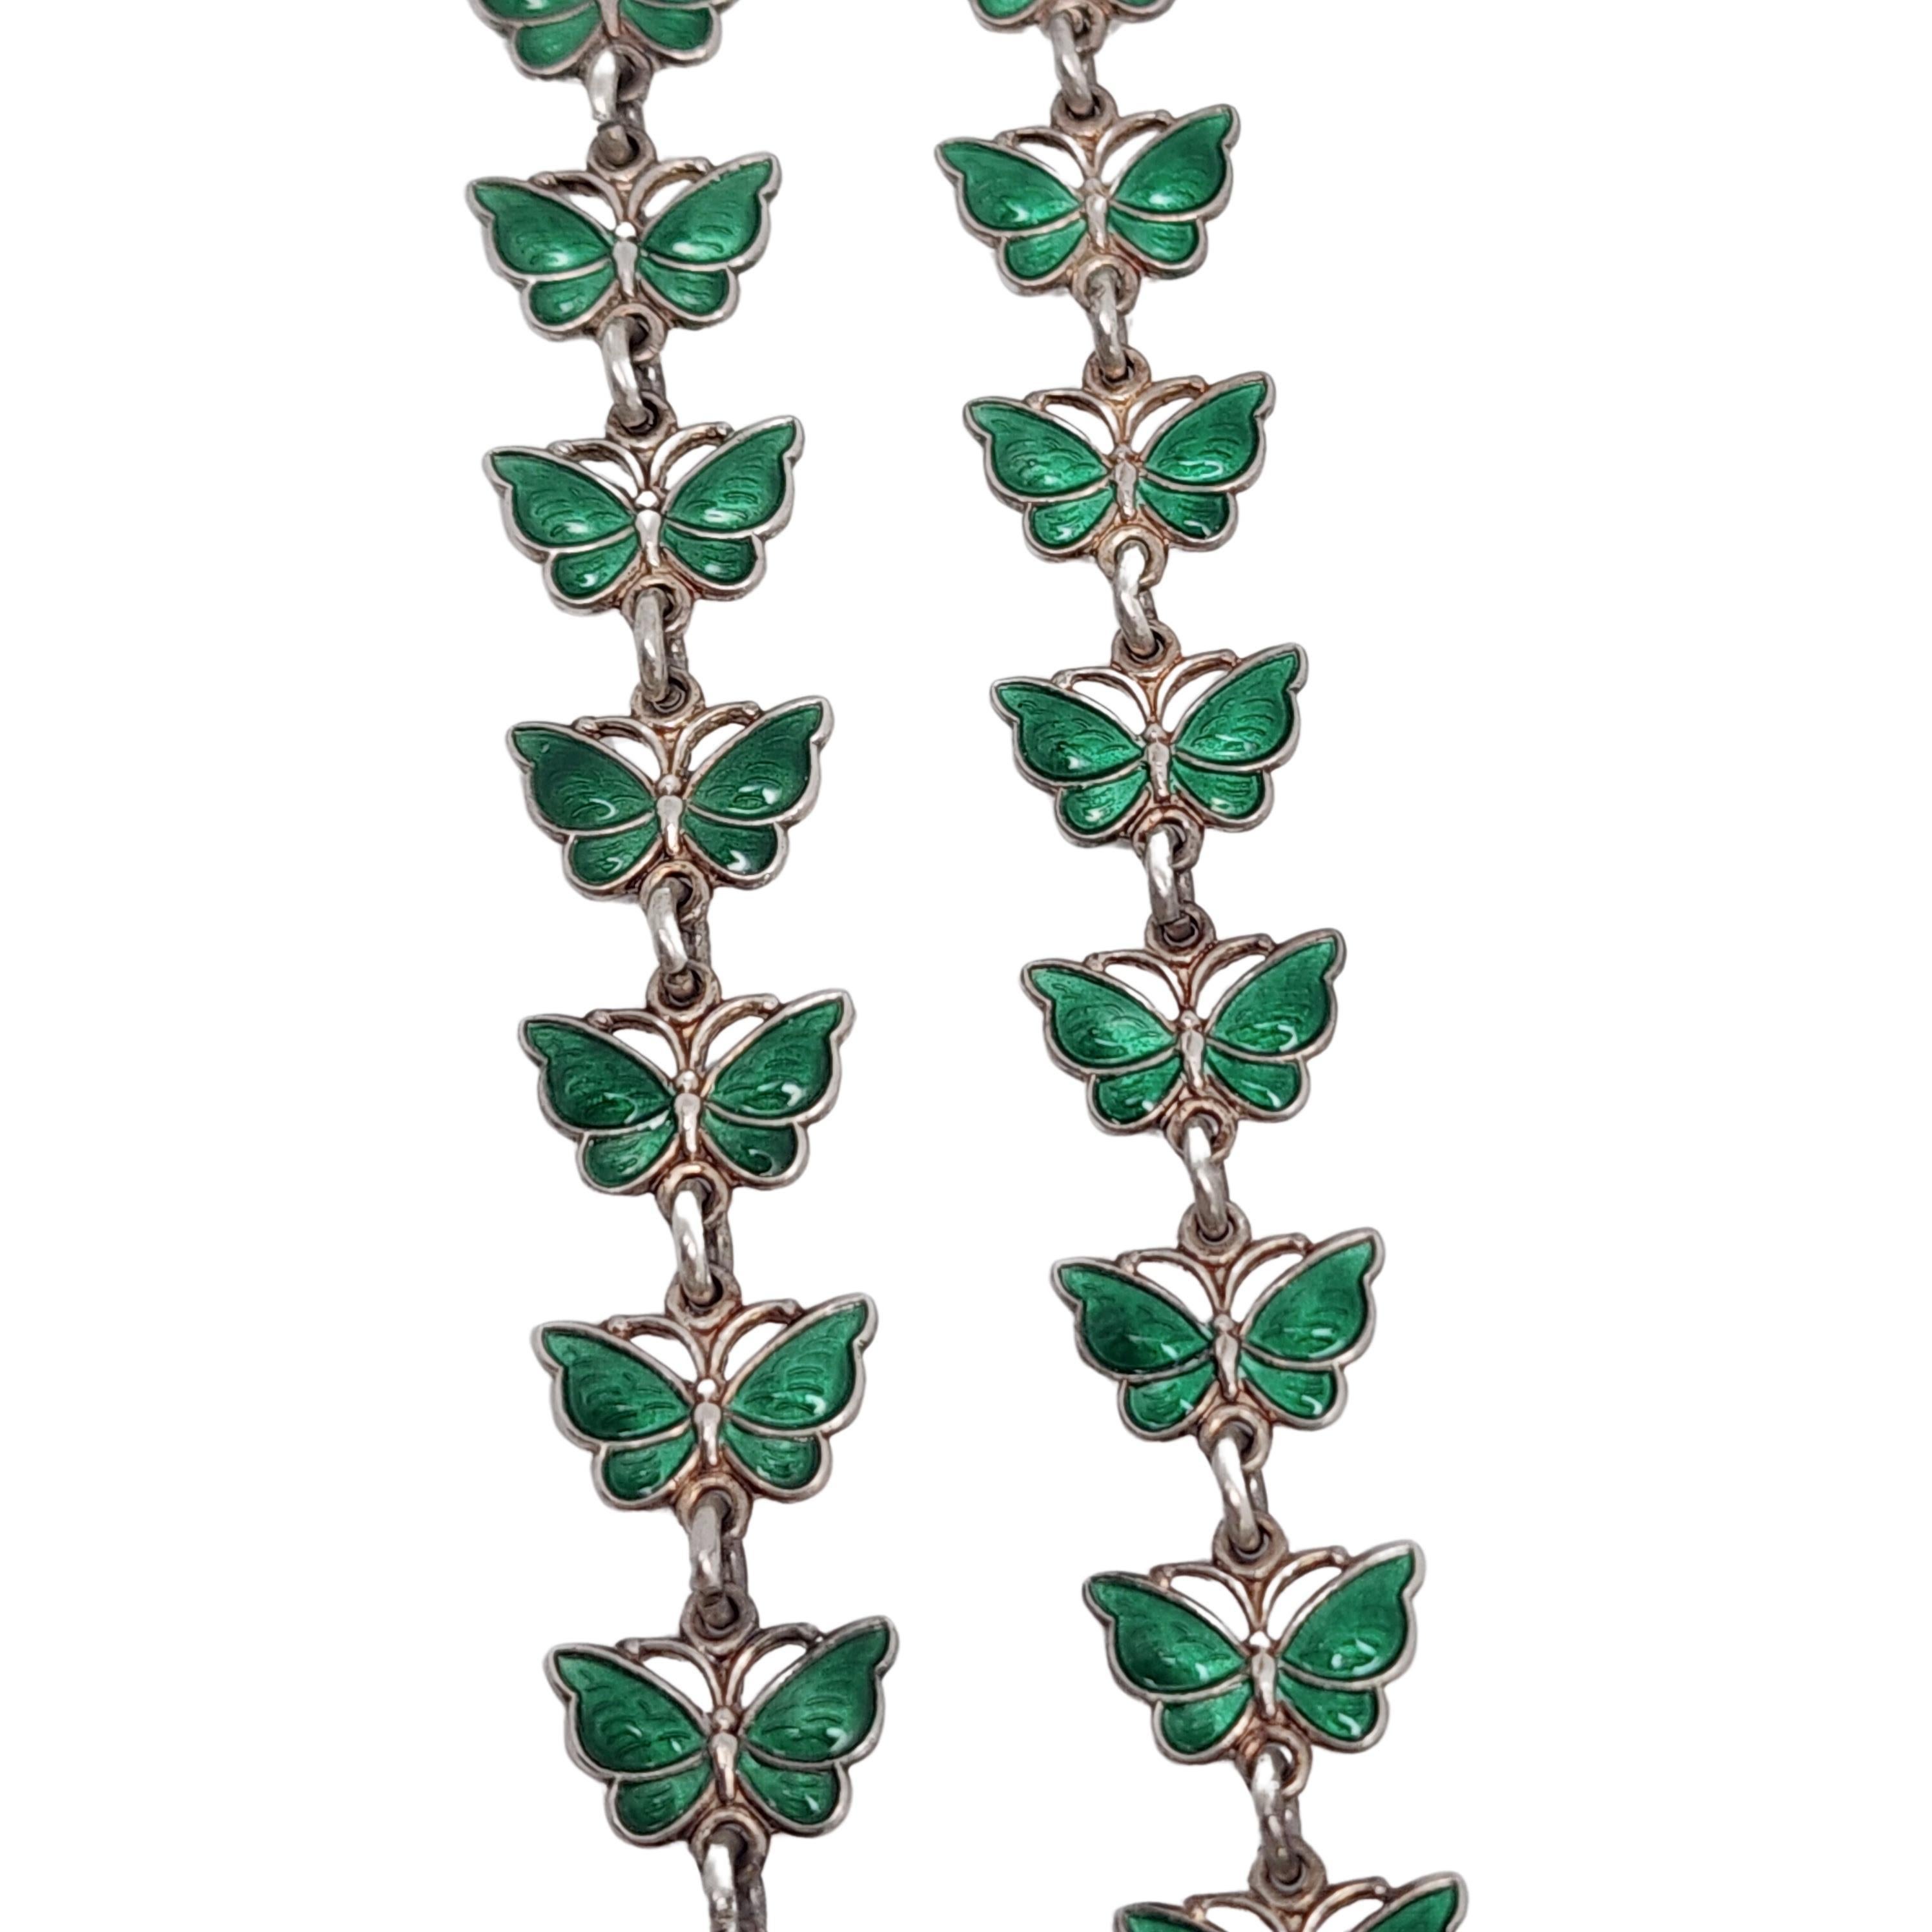 Volmer Bahner Sterling Silver Green Enamel Butterfly Necklace & Bracelet #16436 In Good Condition For Sale In Washington Depot, CT